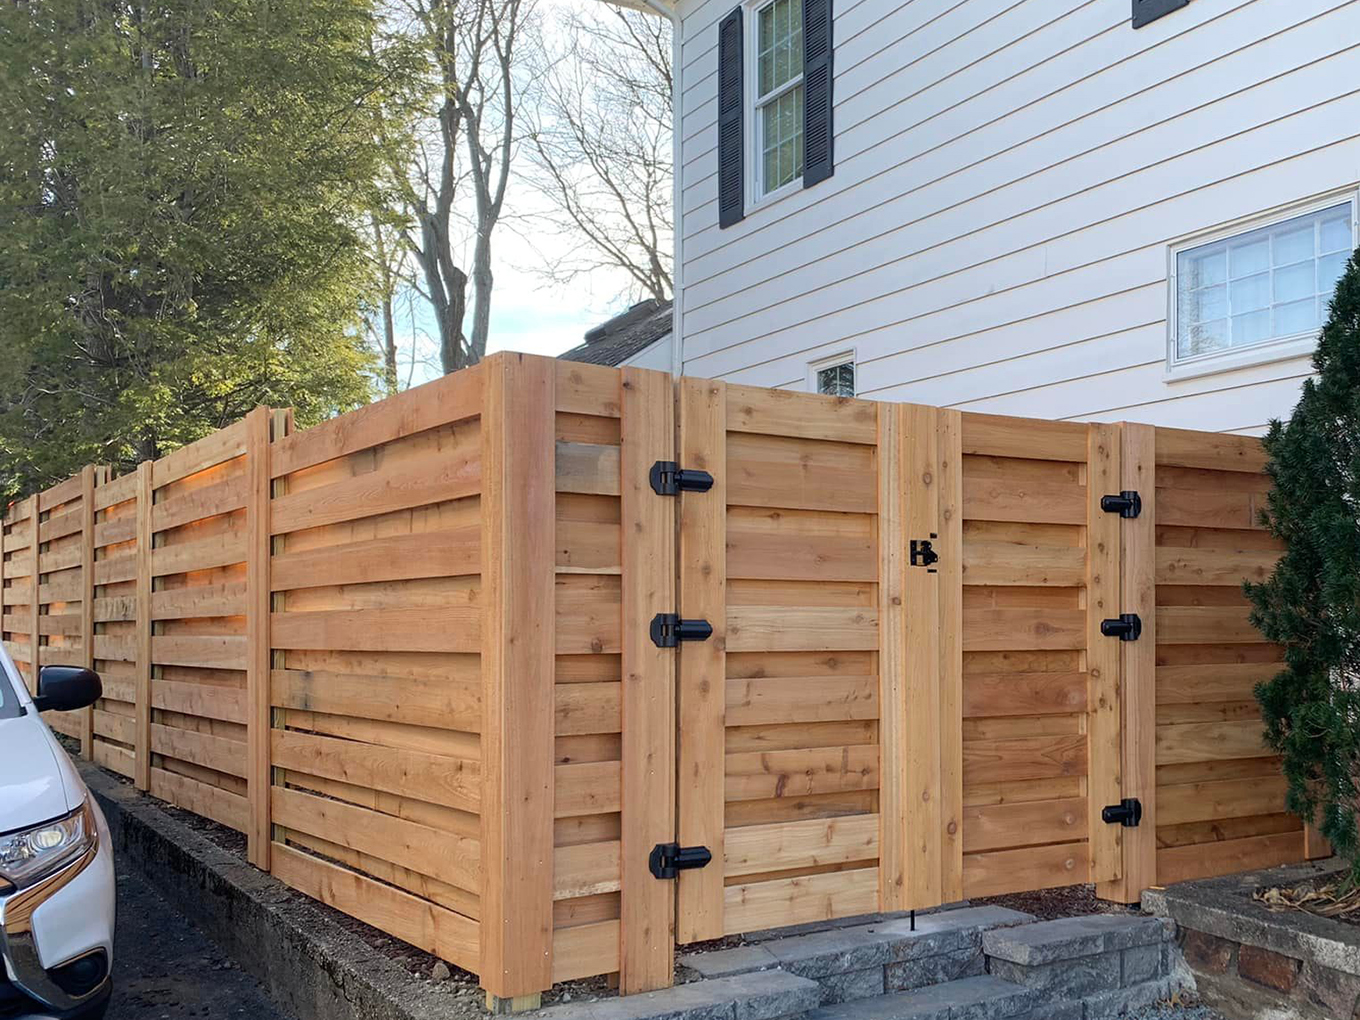 North Andover MA horizontal style wood fence